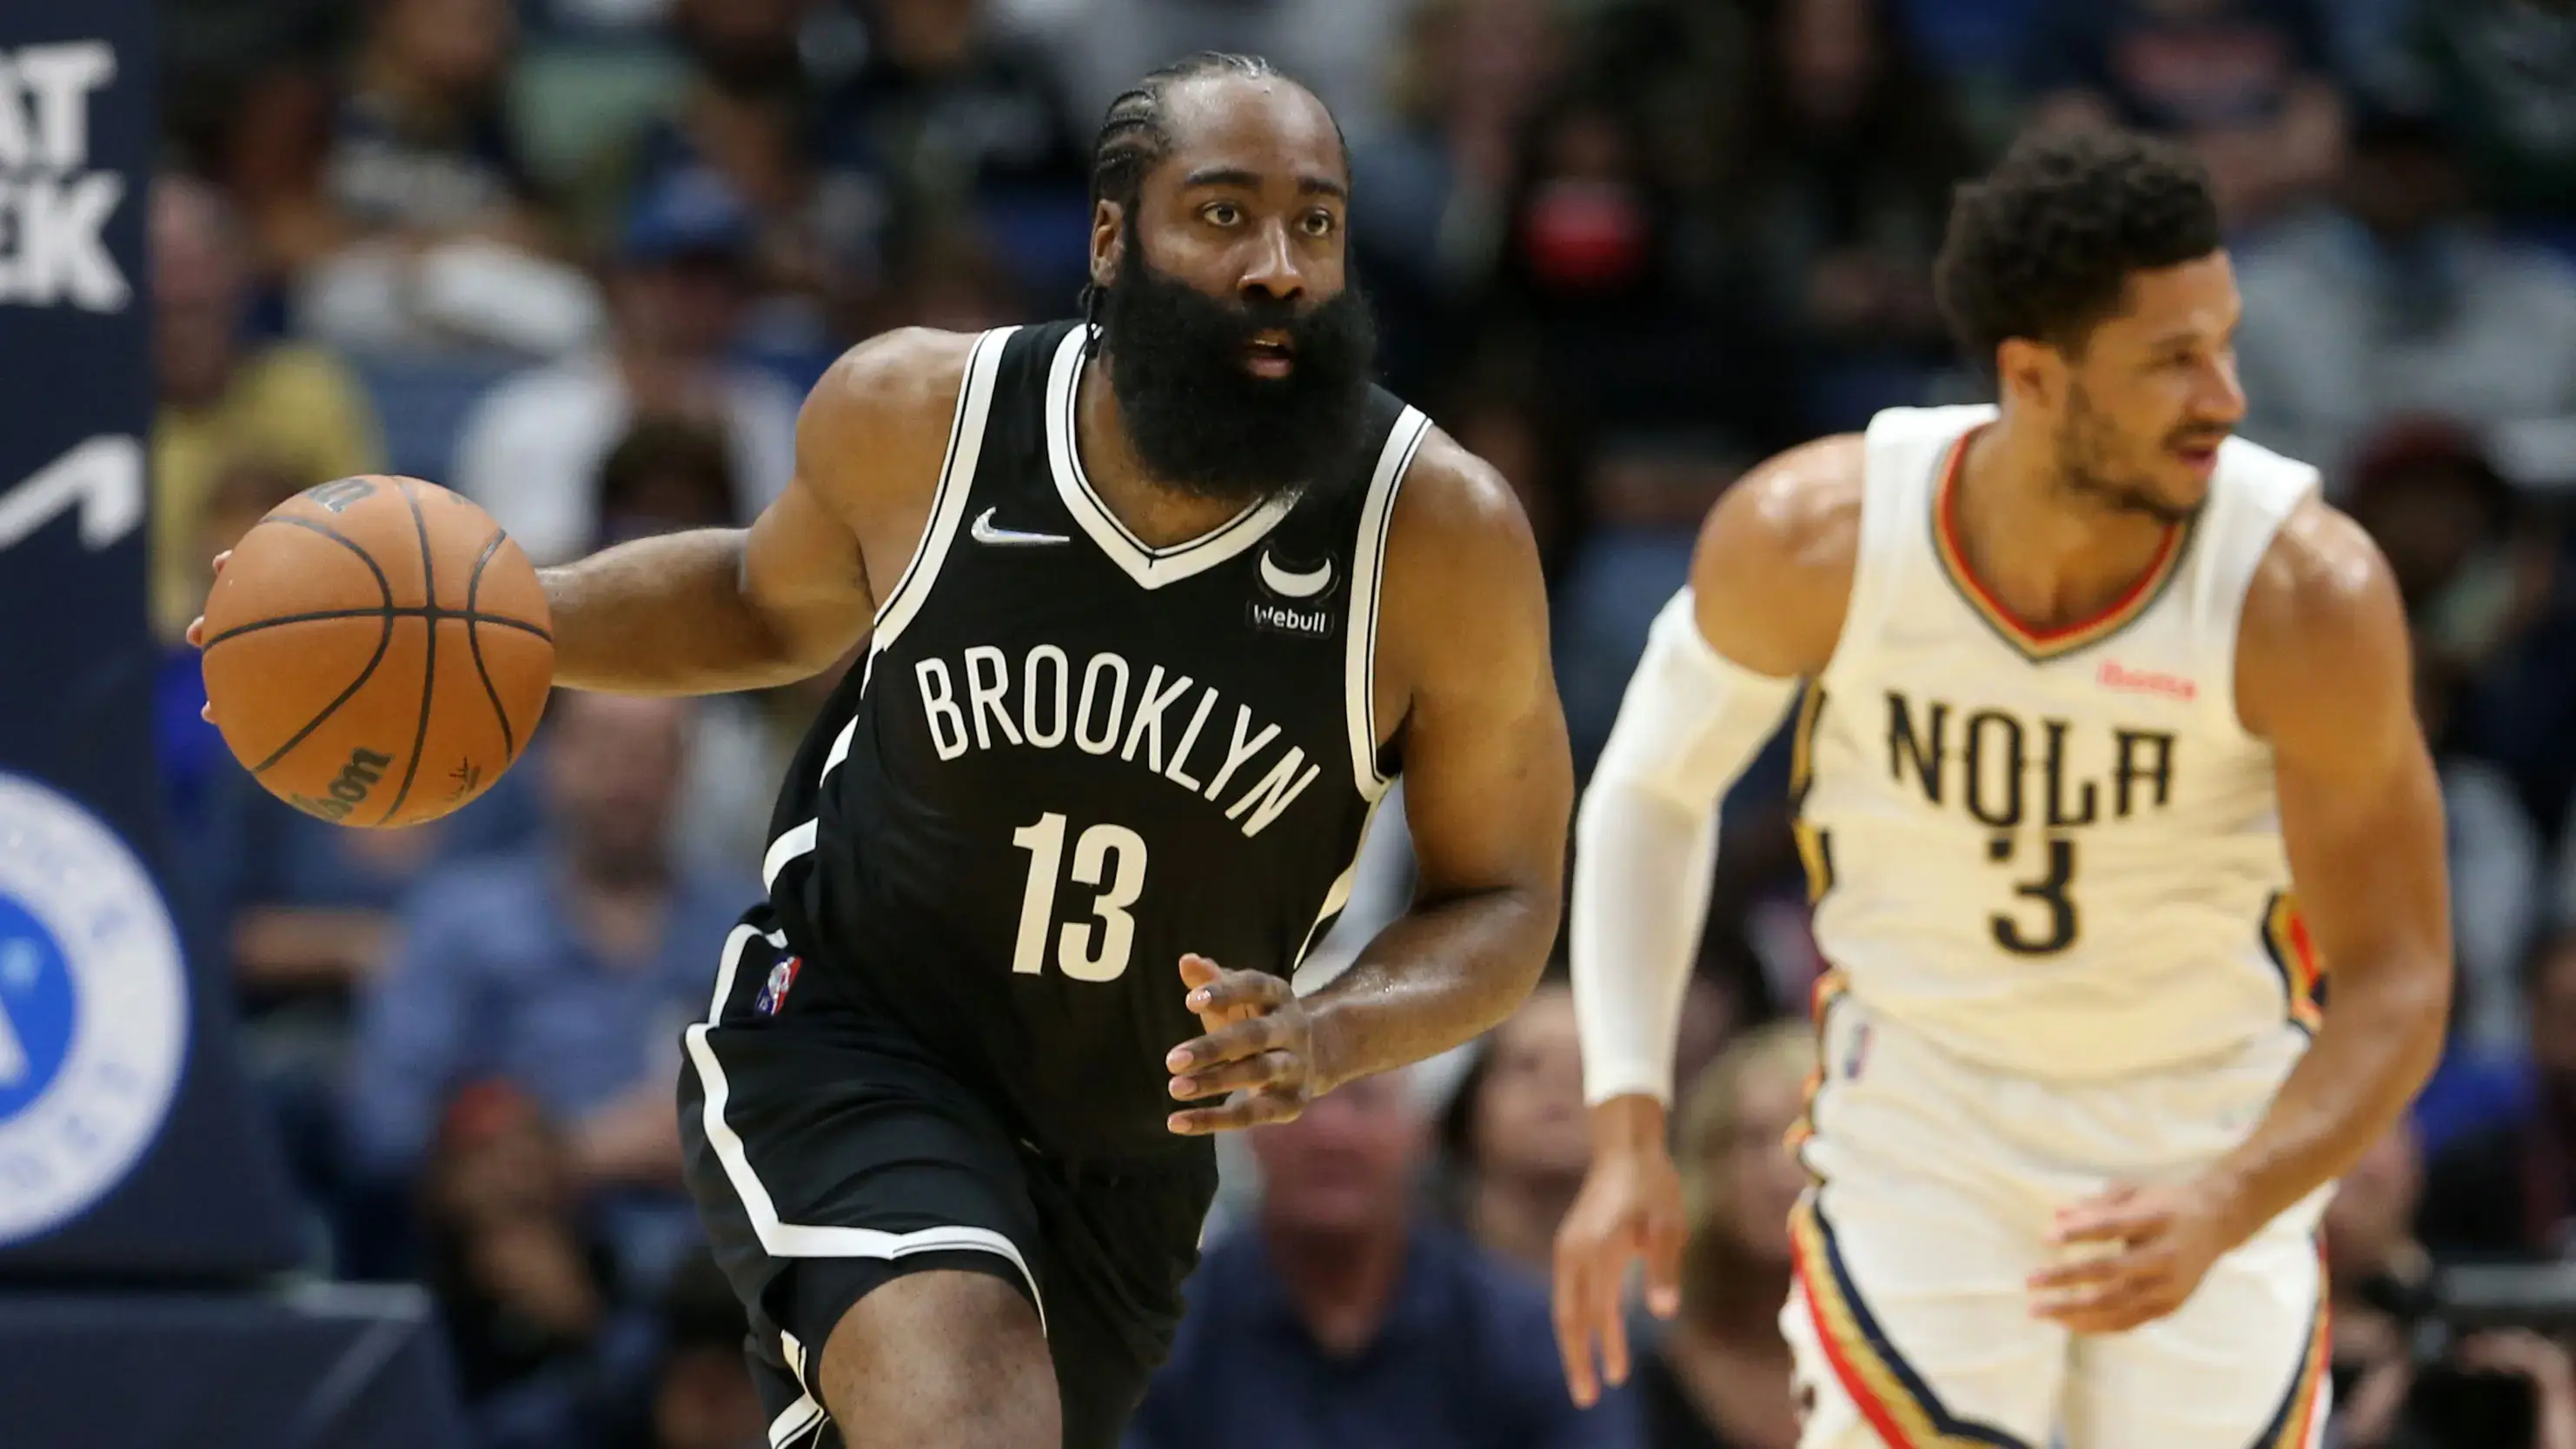 Nov 12, 2021; New Orleans, Louisiana, USA; Brooklyn Nets guard James Harden (13) dribbles up court during the first quarter against the New Orleans Pelicans at the Smoothie King Center. / Chuck Cook-USA TODAY Sports